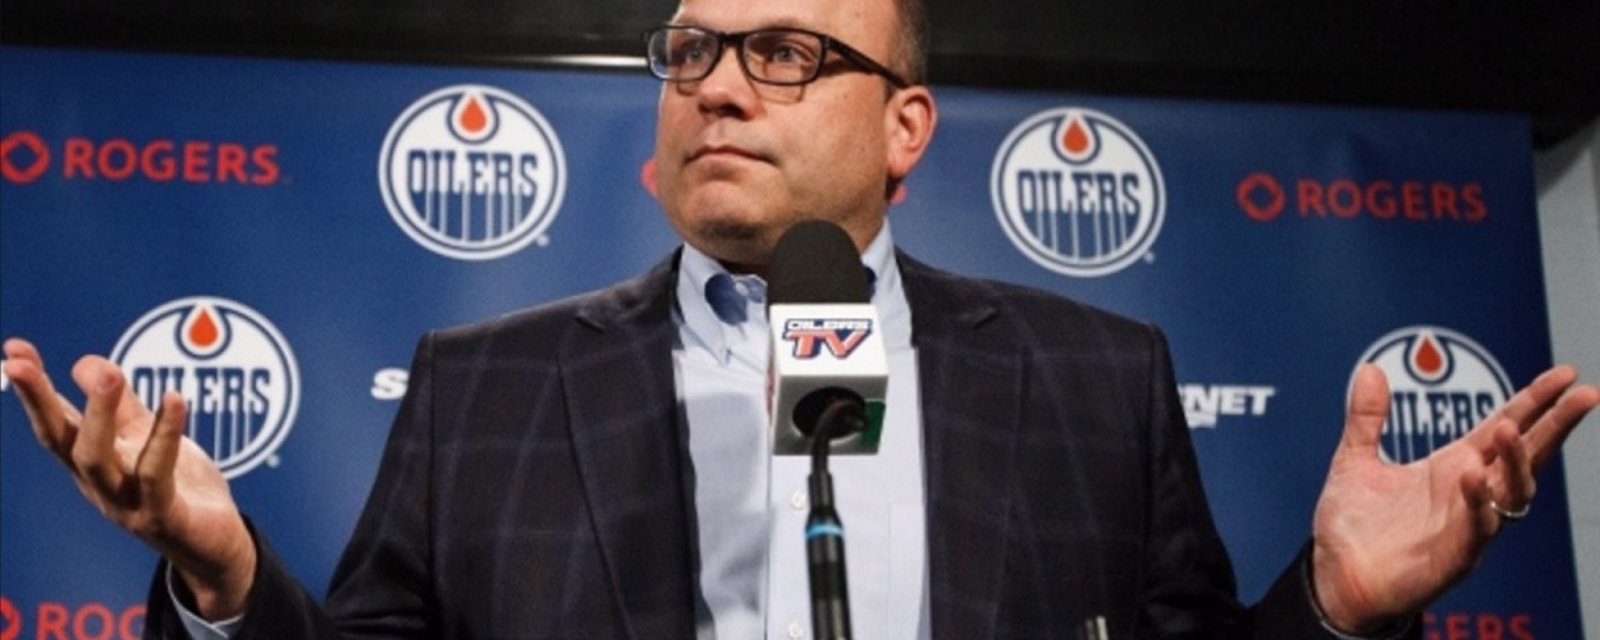 Breaking: Oilers announce press conference with Peter Chiarelli.